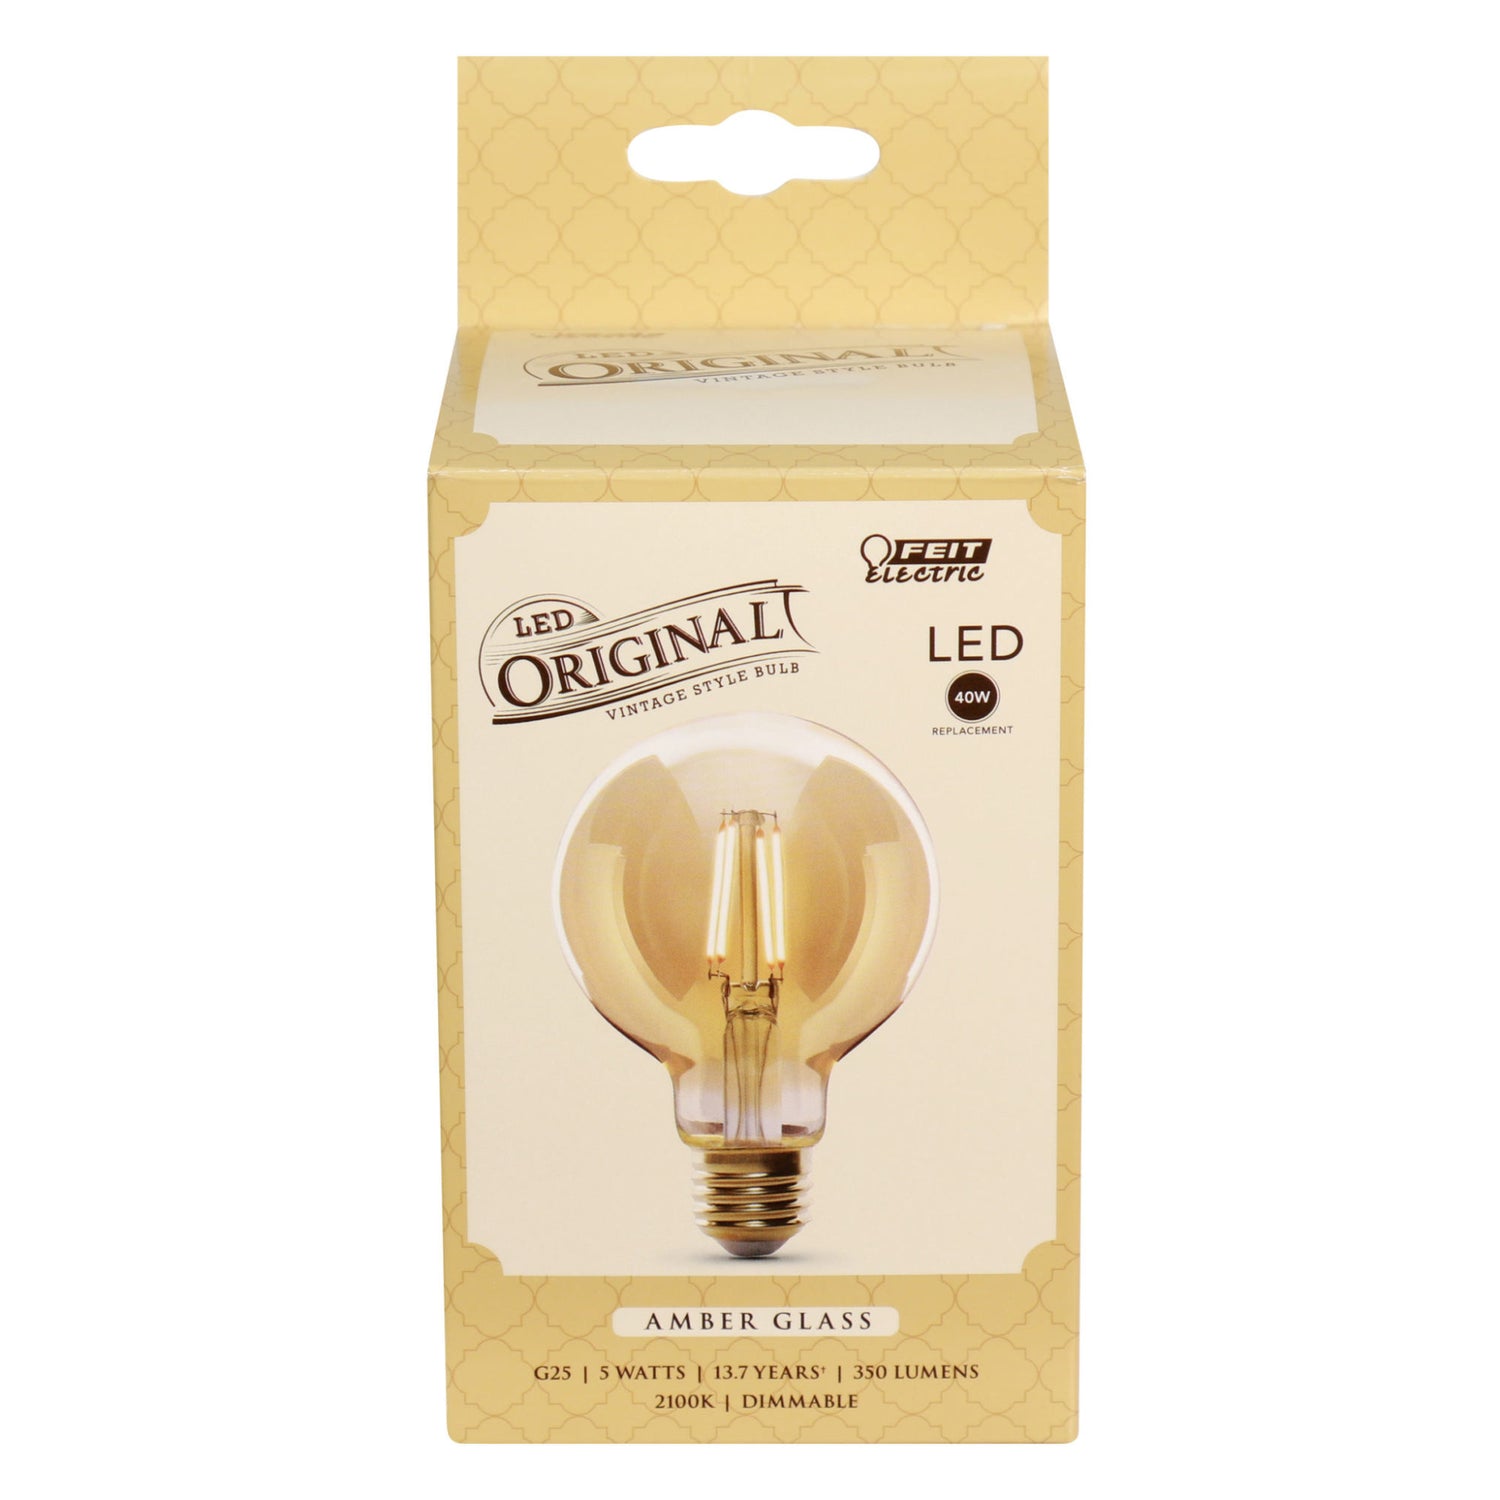 5W (40W Replacement) G25 E26 Dimmable Straight Filament Amber Glass Vintage Edison LED Light Bulb, Soft White